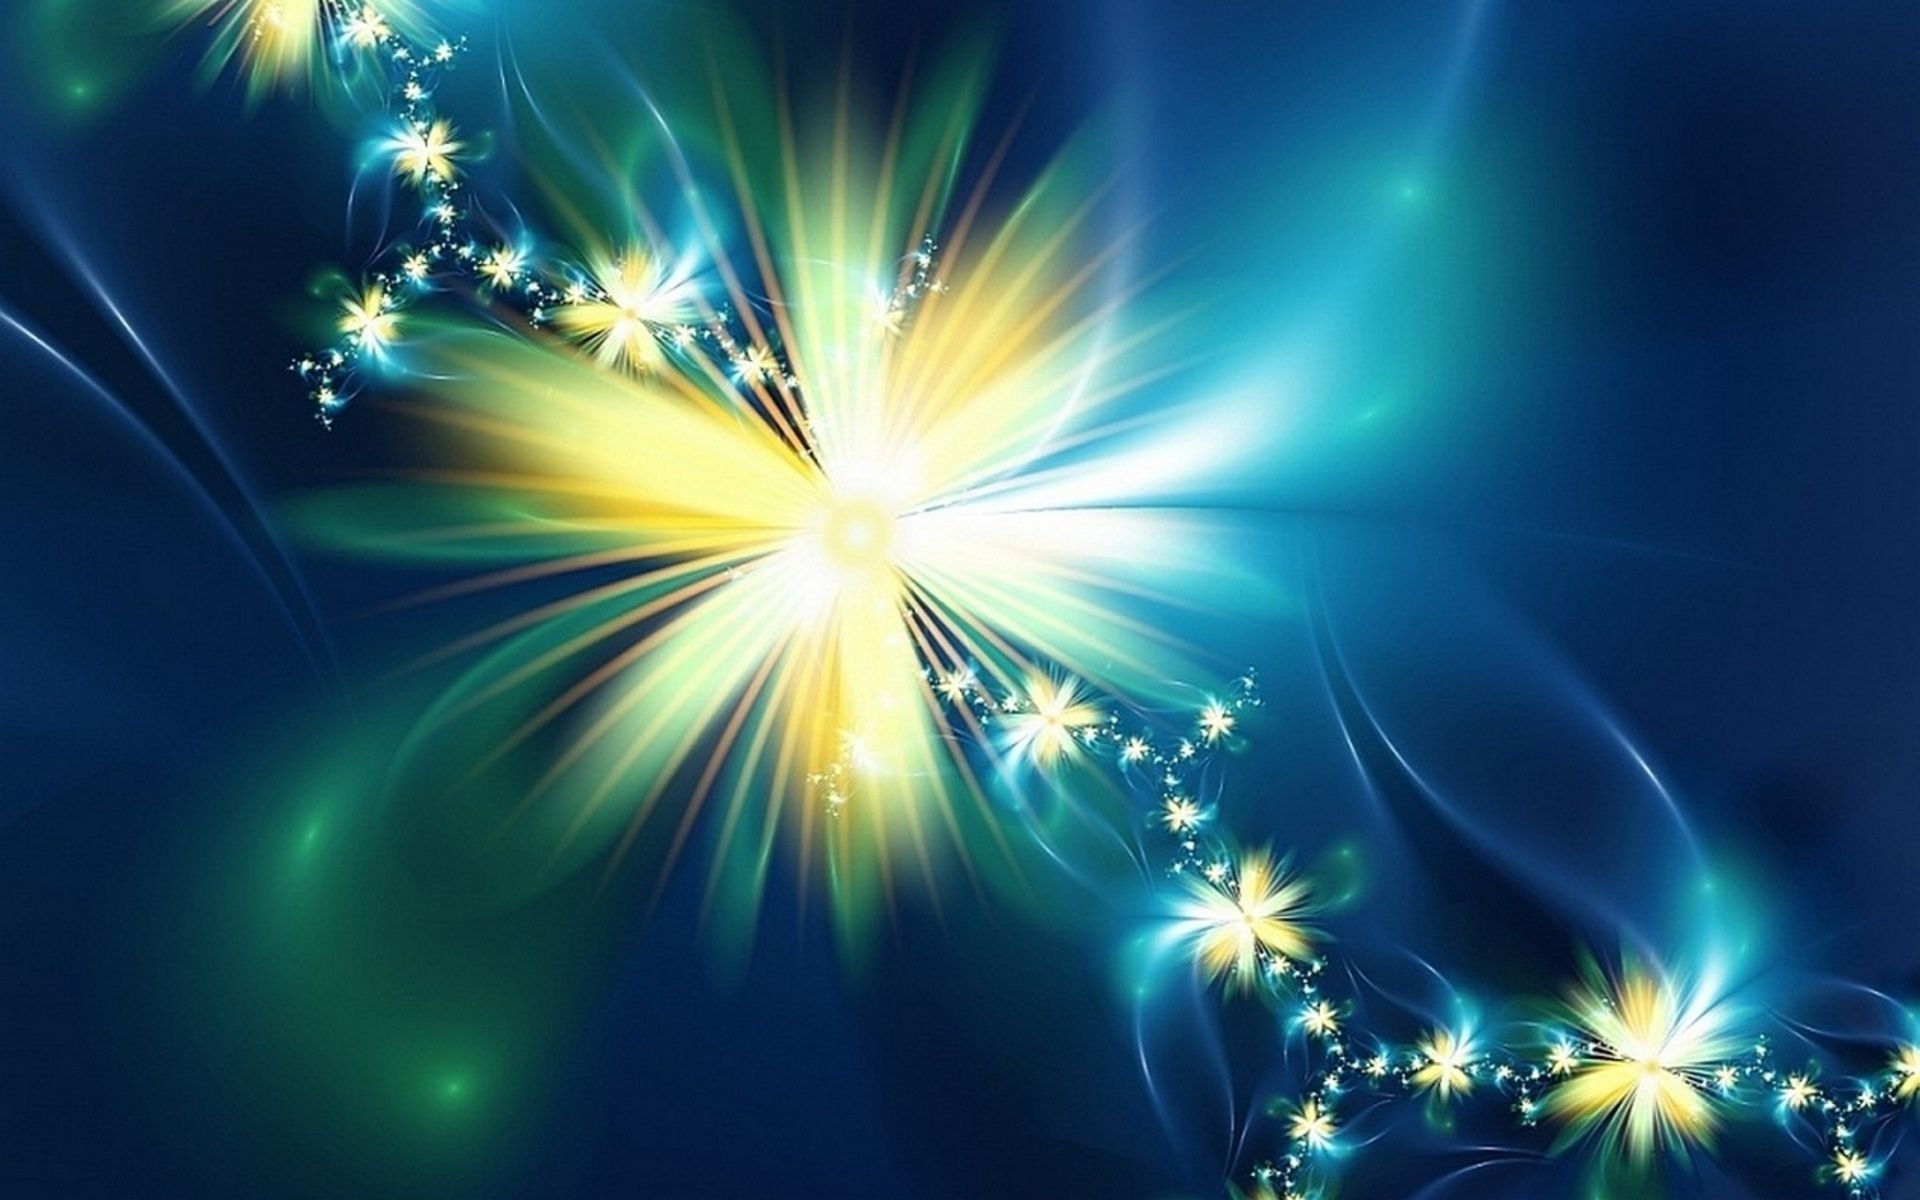 Magical Abstract Flowers Wallpaper Download Free